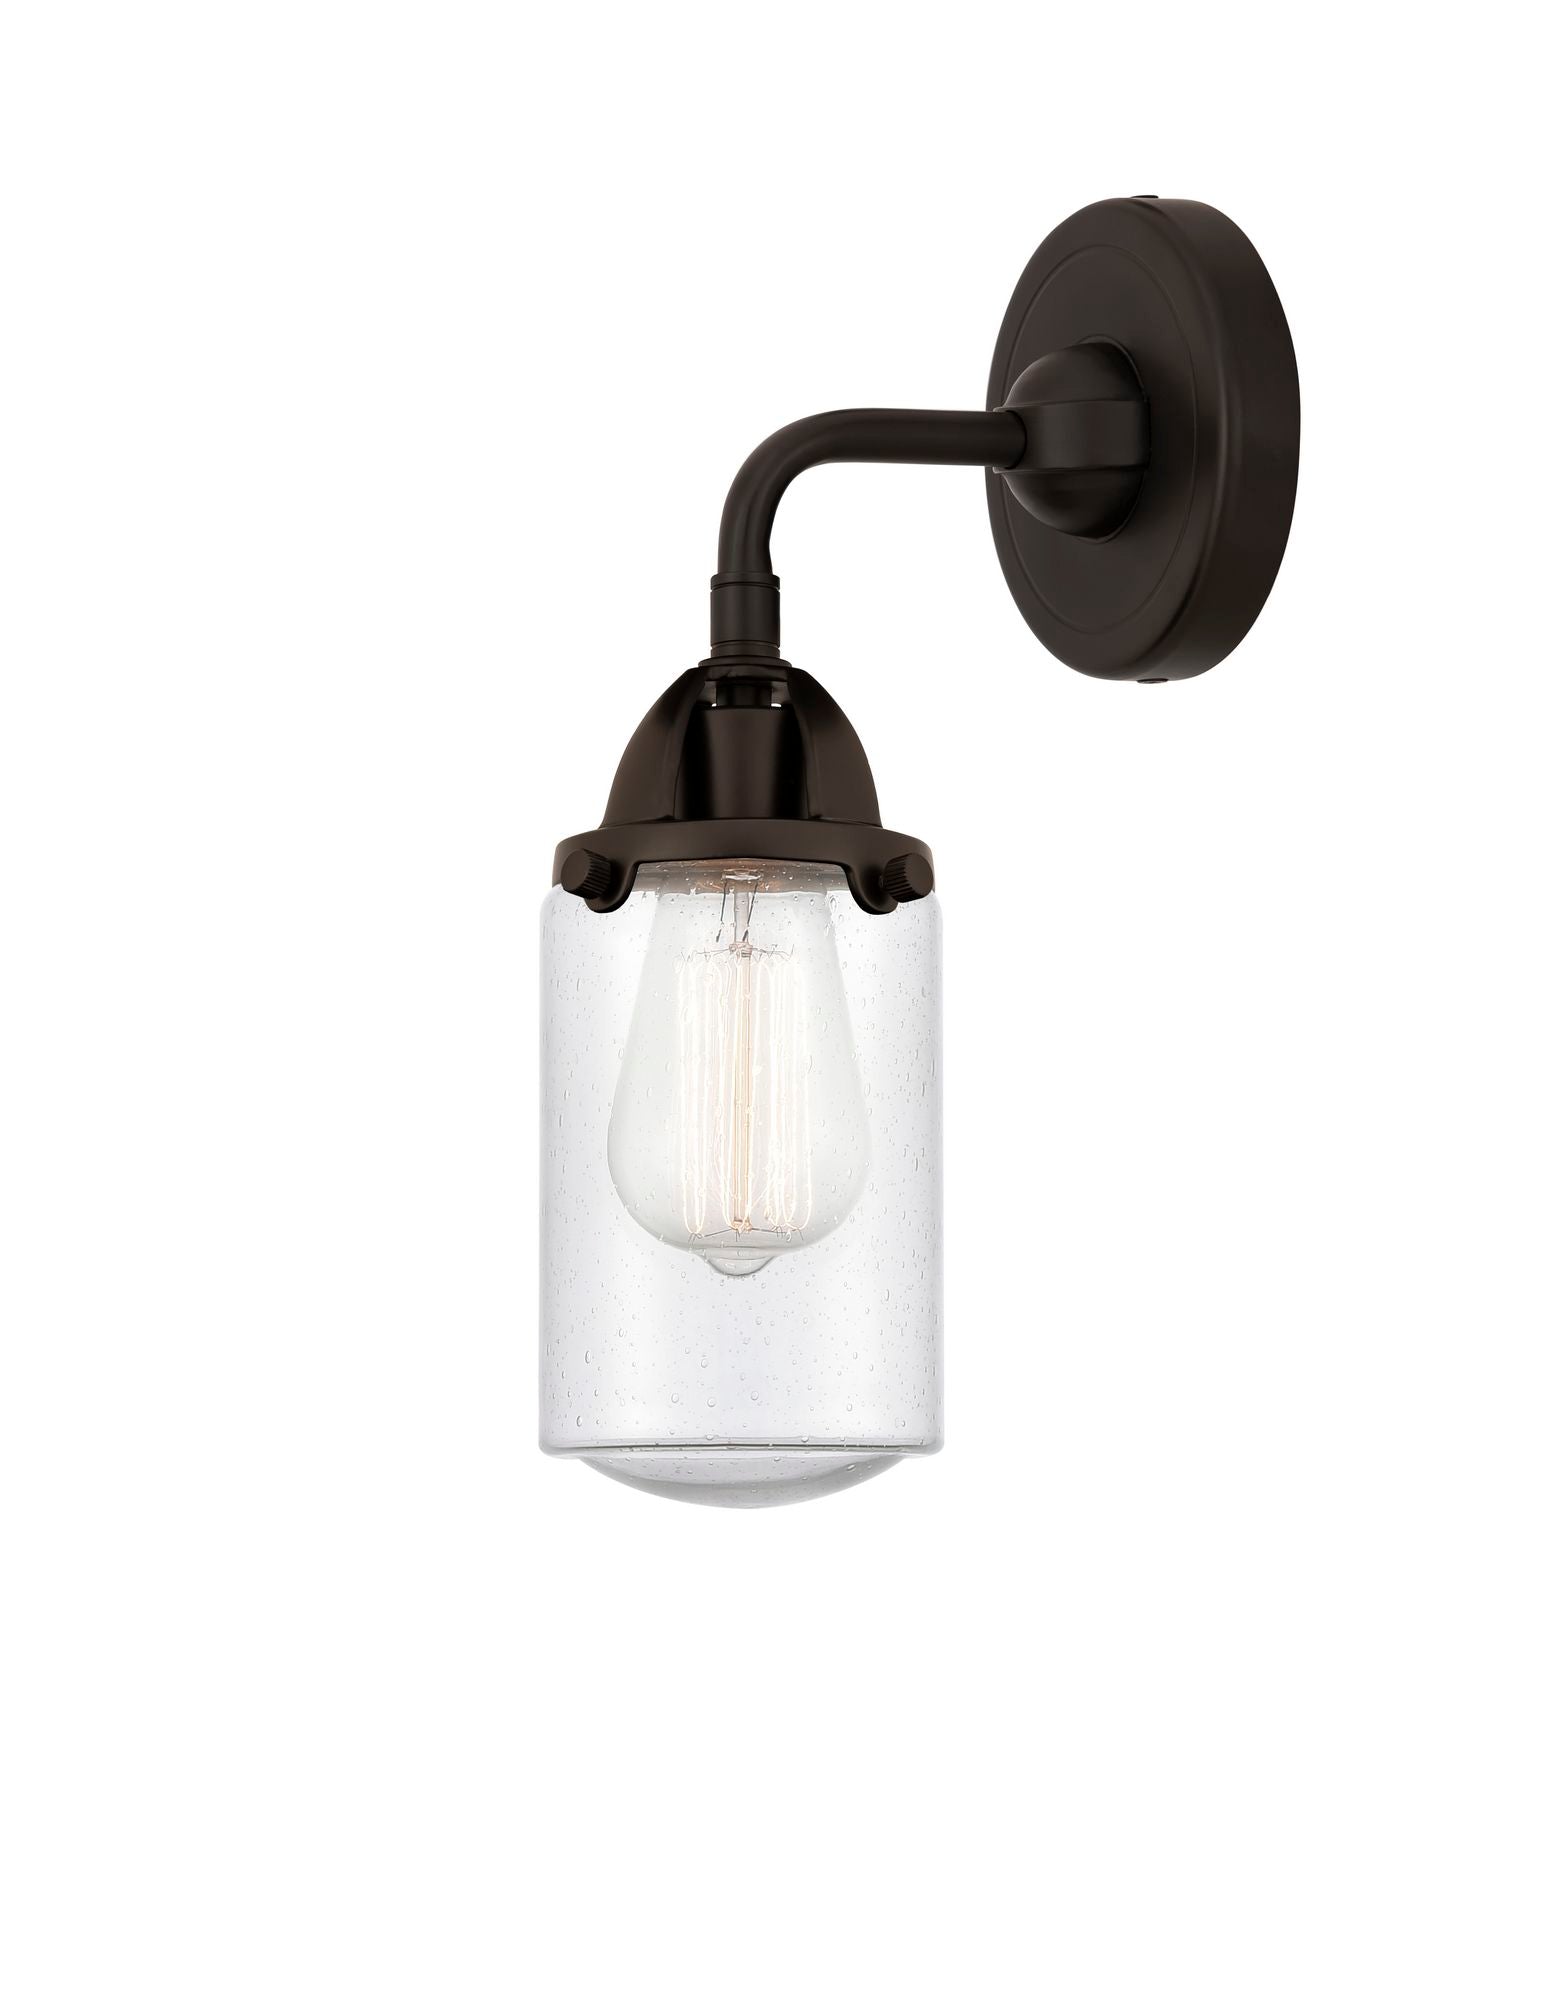 288-1W-OB-G314 1-Light 4.5" Oil Rubbed Bronze Sconce - Seedy Dover Glass - LED Bulb - Dimmensions: 4.5 x 6.5 x 10.875 - Glass Up or Down: Yes